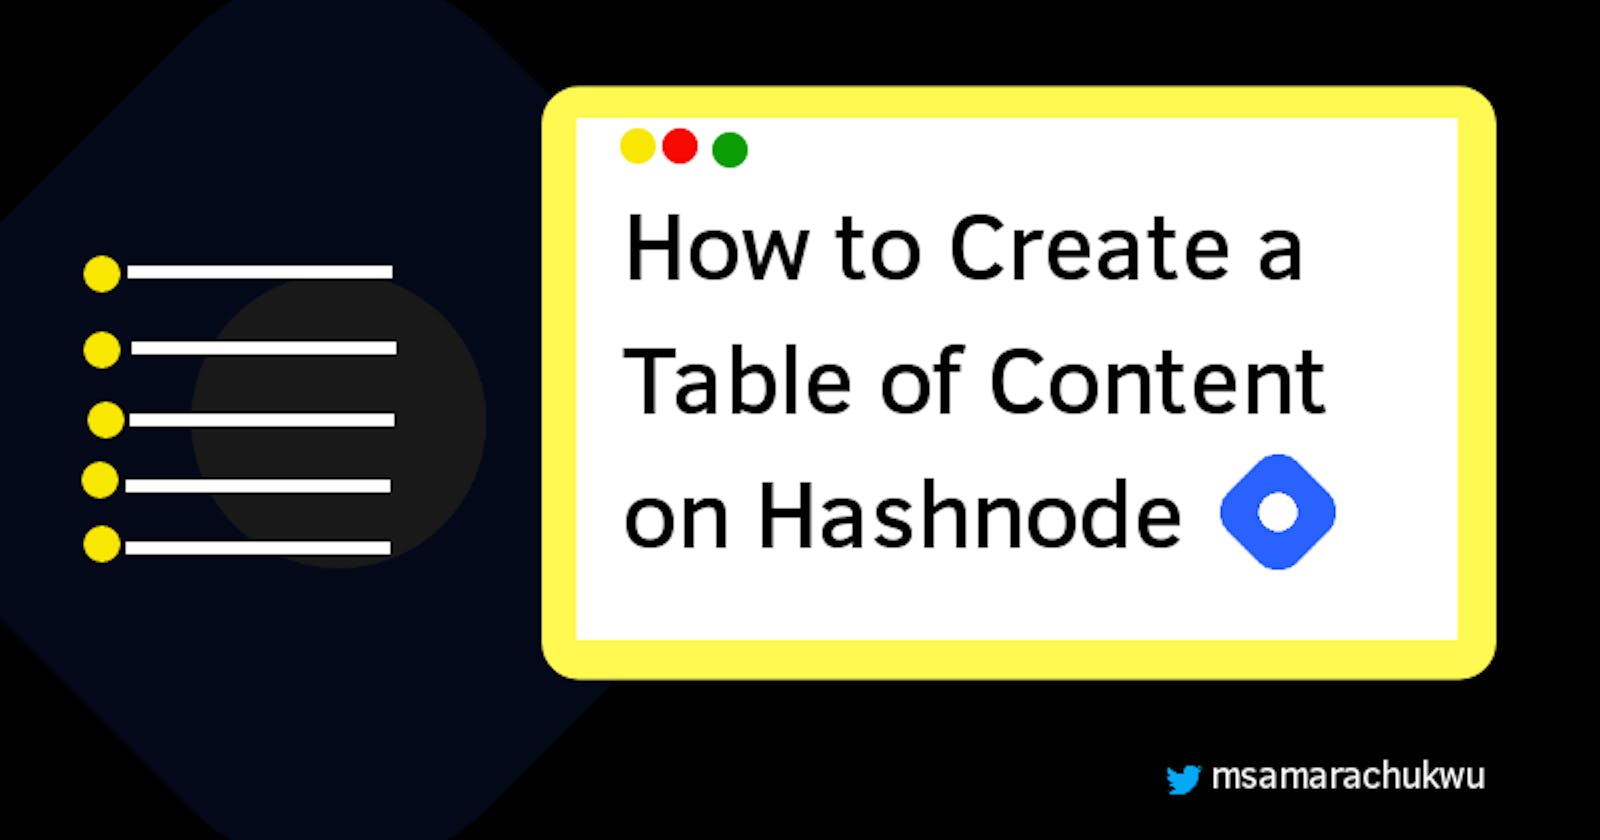 How to Create a Table of Content on Hashnode